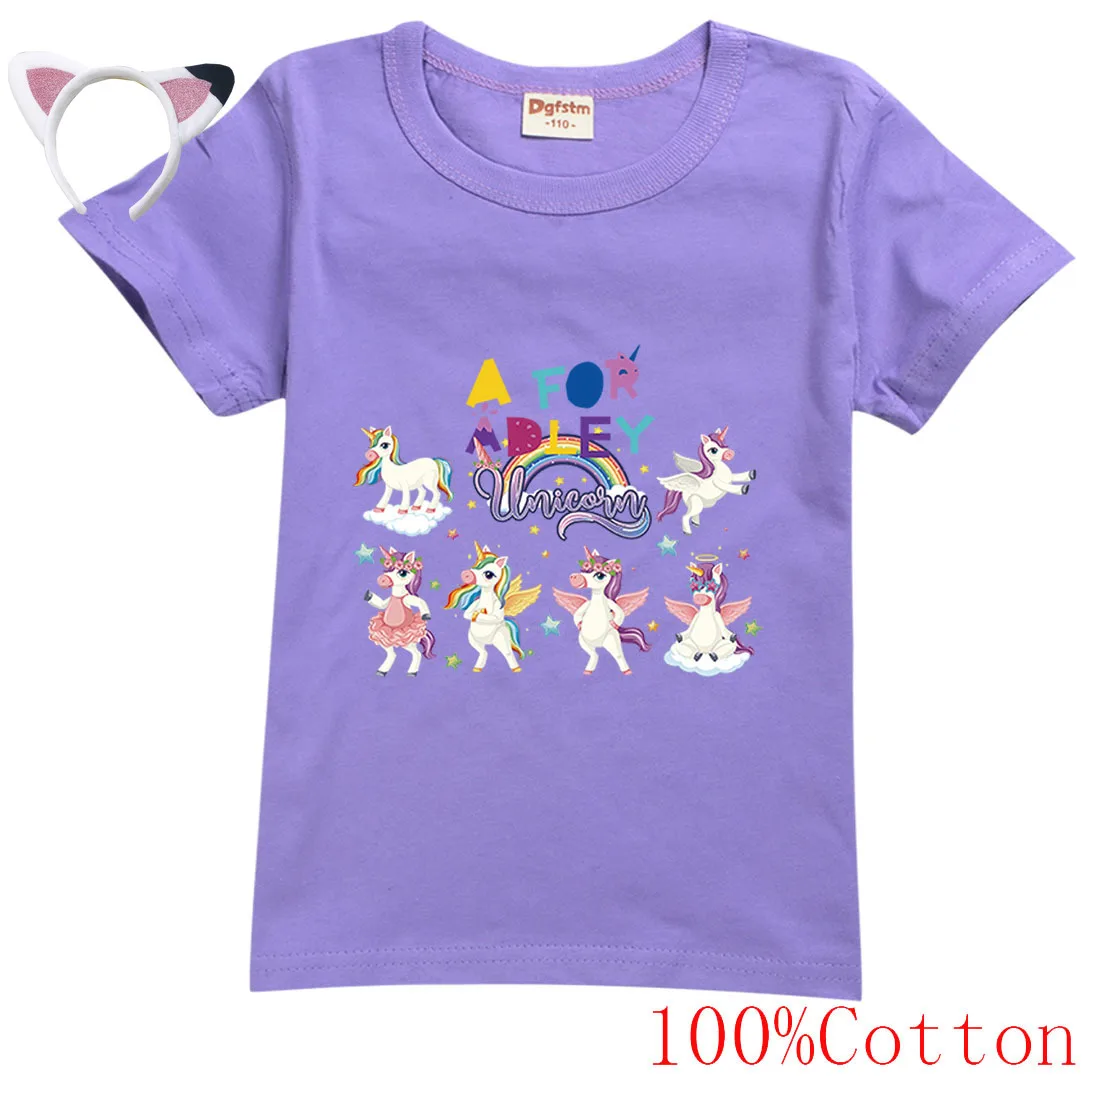 

2023 Summer Fashion A for Adley Clothes Kids Pure Cotton T Shirt Baby Girls T-Shirt Teenager Boys Tops Children Short Sleeve Tee